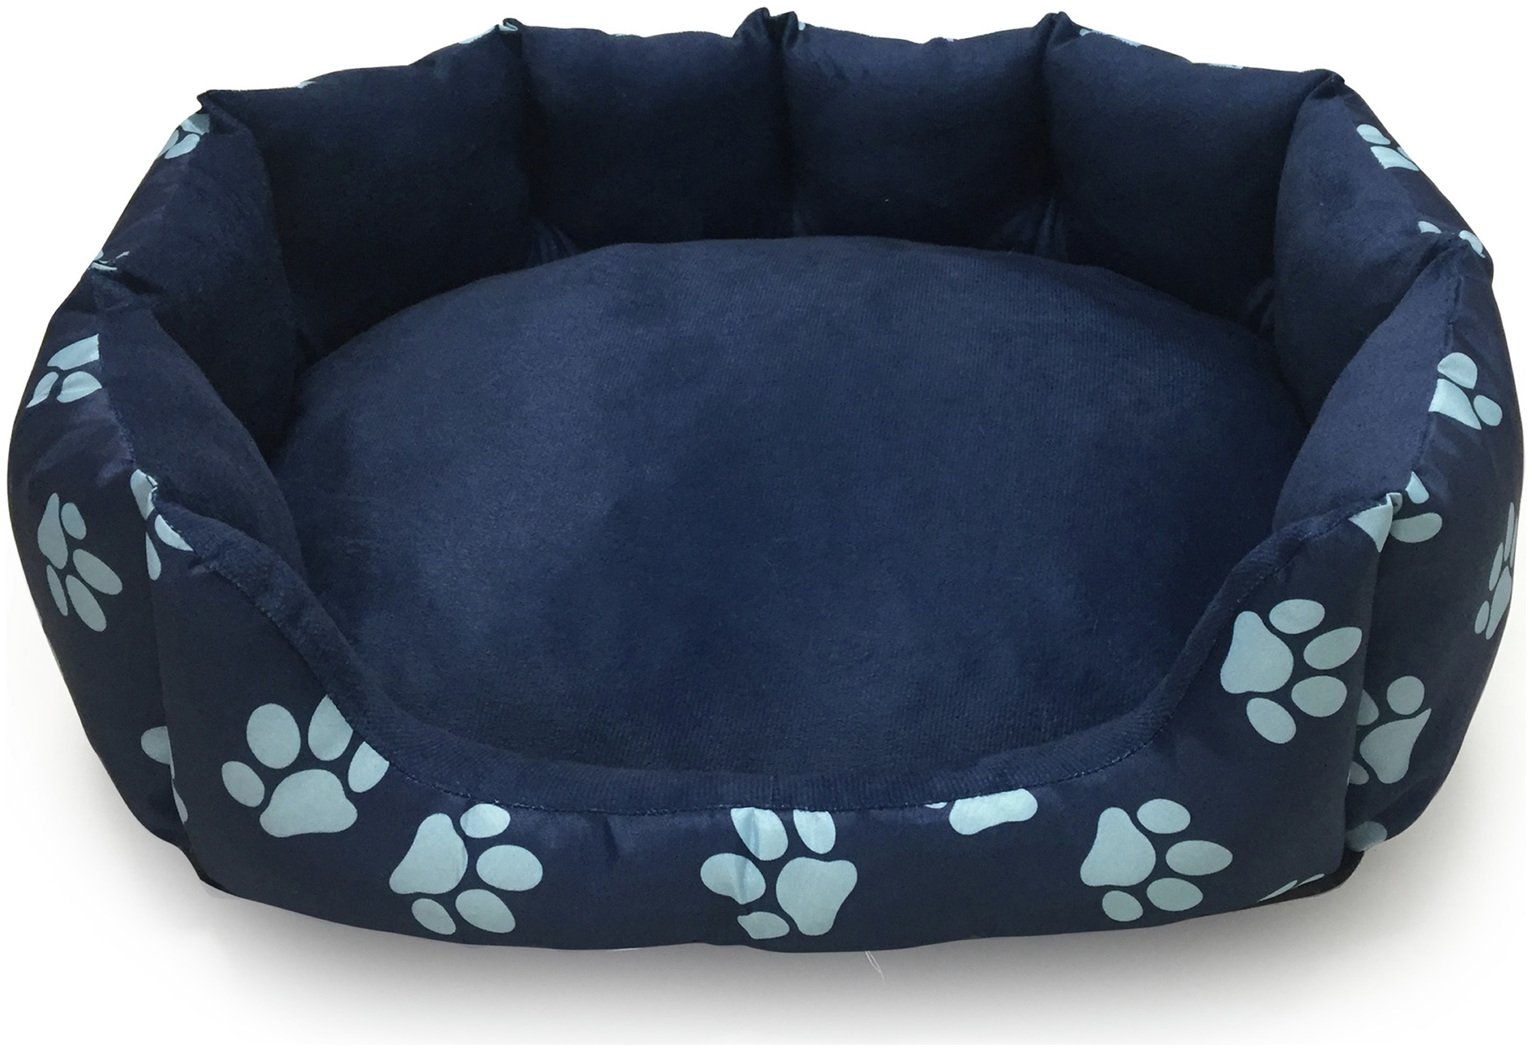 Paw Print Oval Navy Pet Bed - Small